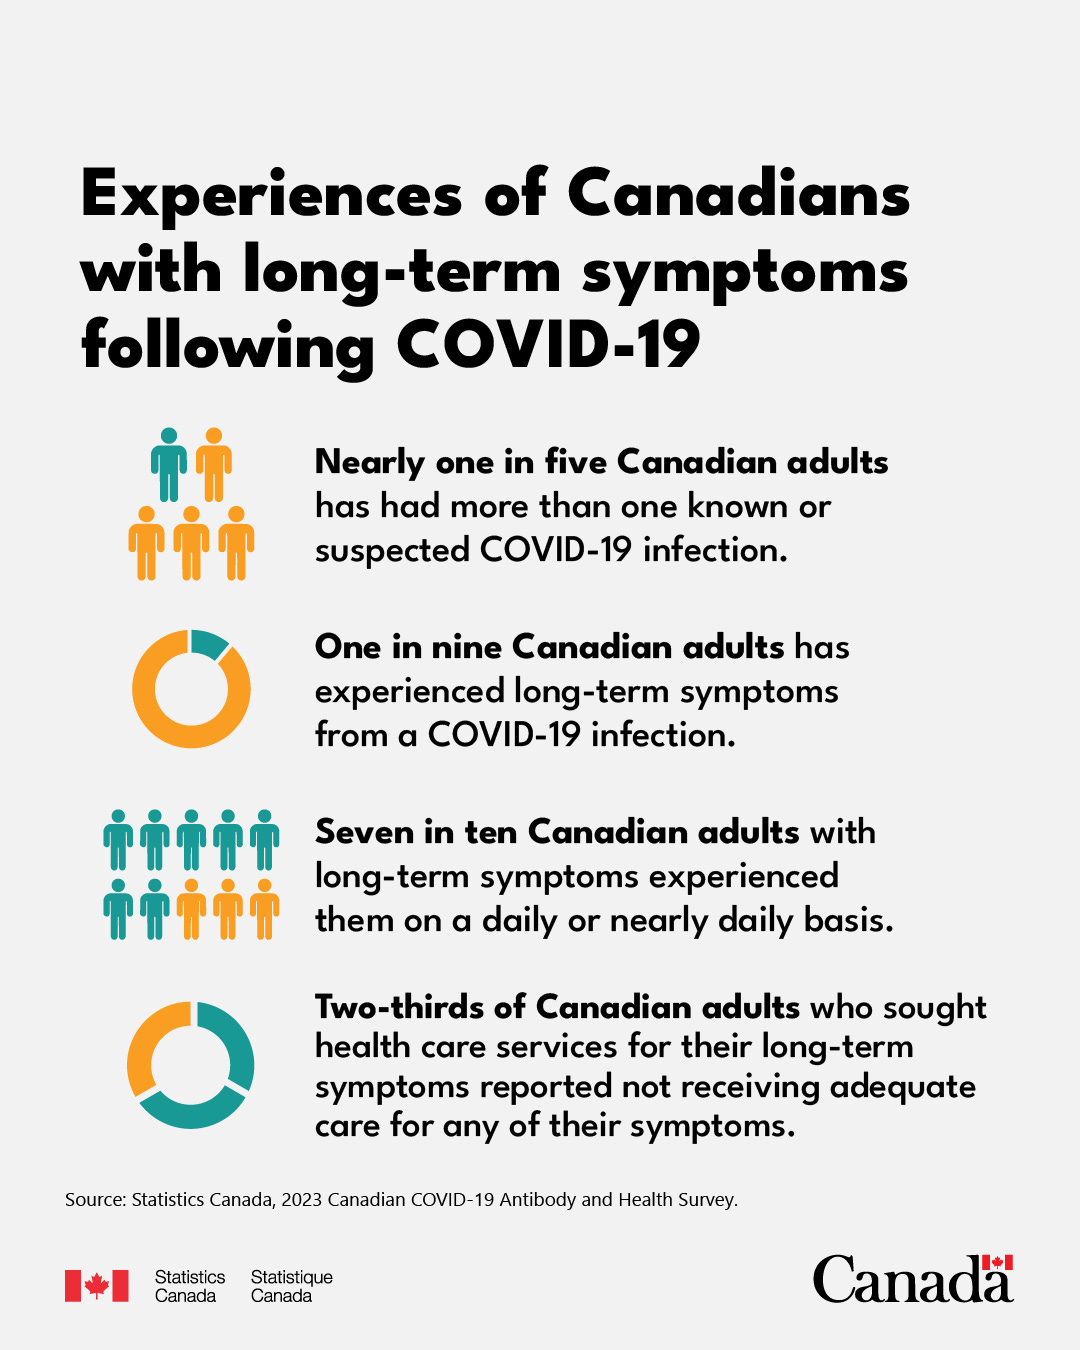 Nearly one in five Canadian adults has had more than one known or suspected COVID-19 infection.
• One in nine Canadian adults has experienced long-term symptoms from a COVID-19 infection.
• Seven in 10 Canadian adults with long-term symptoms experienced them on a daily or nearly daily basis.
• Two-thirds of Canadian adults who sought health care services for their long-term symptoms reported not receiving adequate care for any of their symptoms.